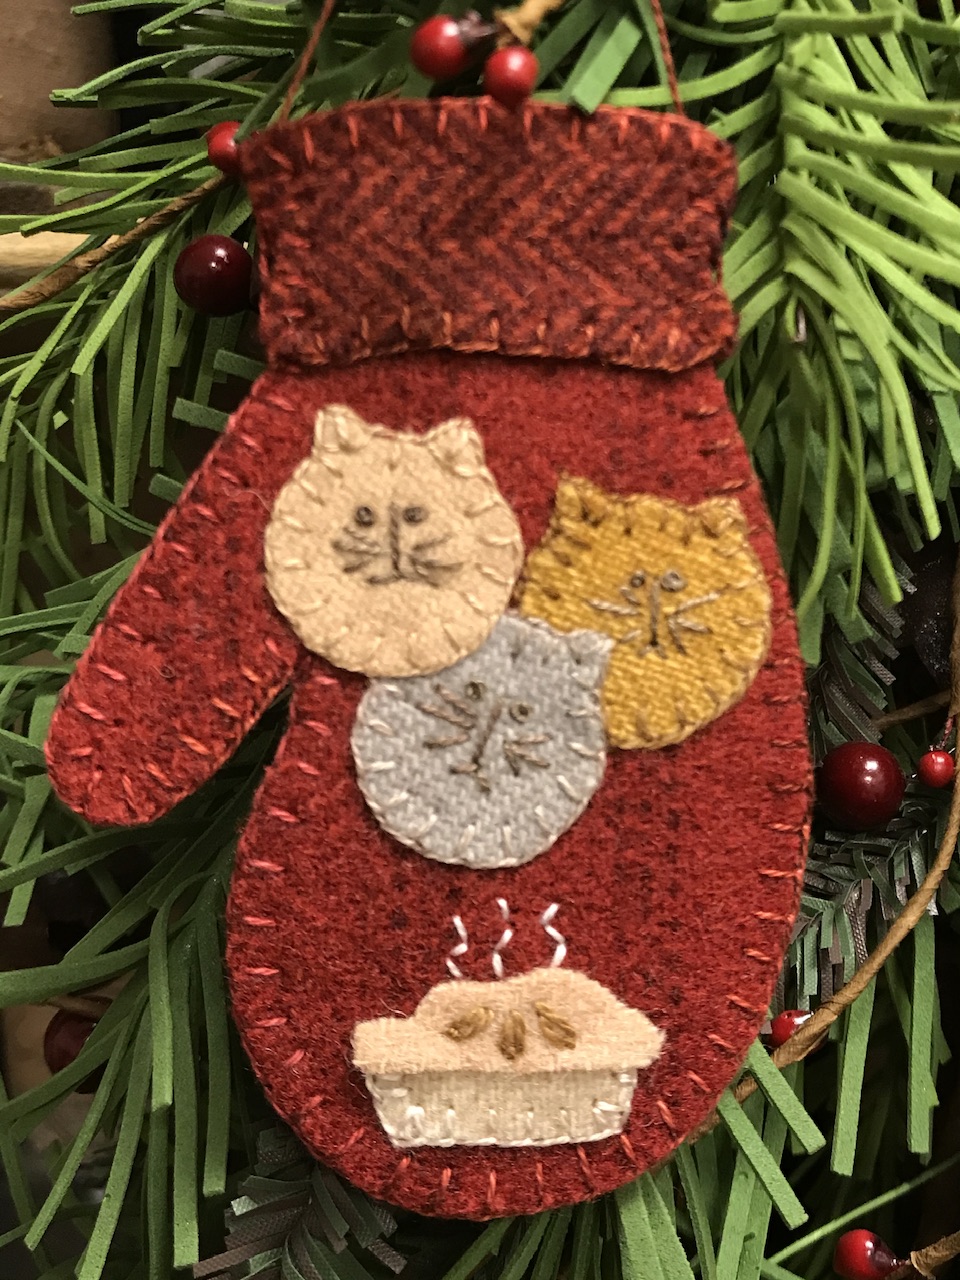 December 2019 Ornament of the Month